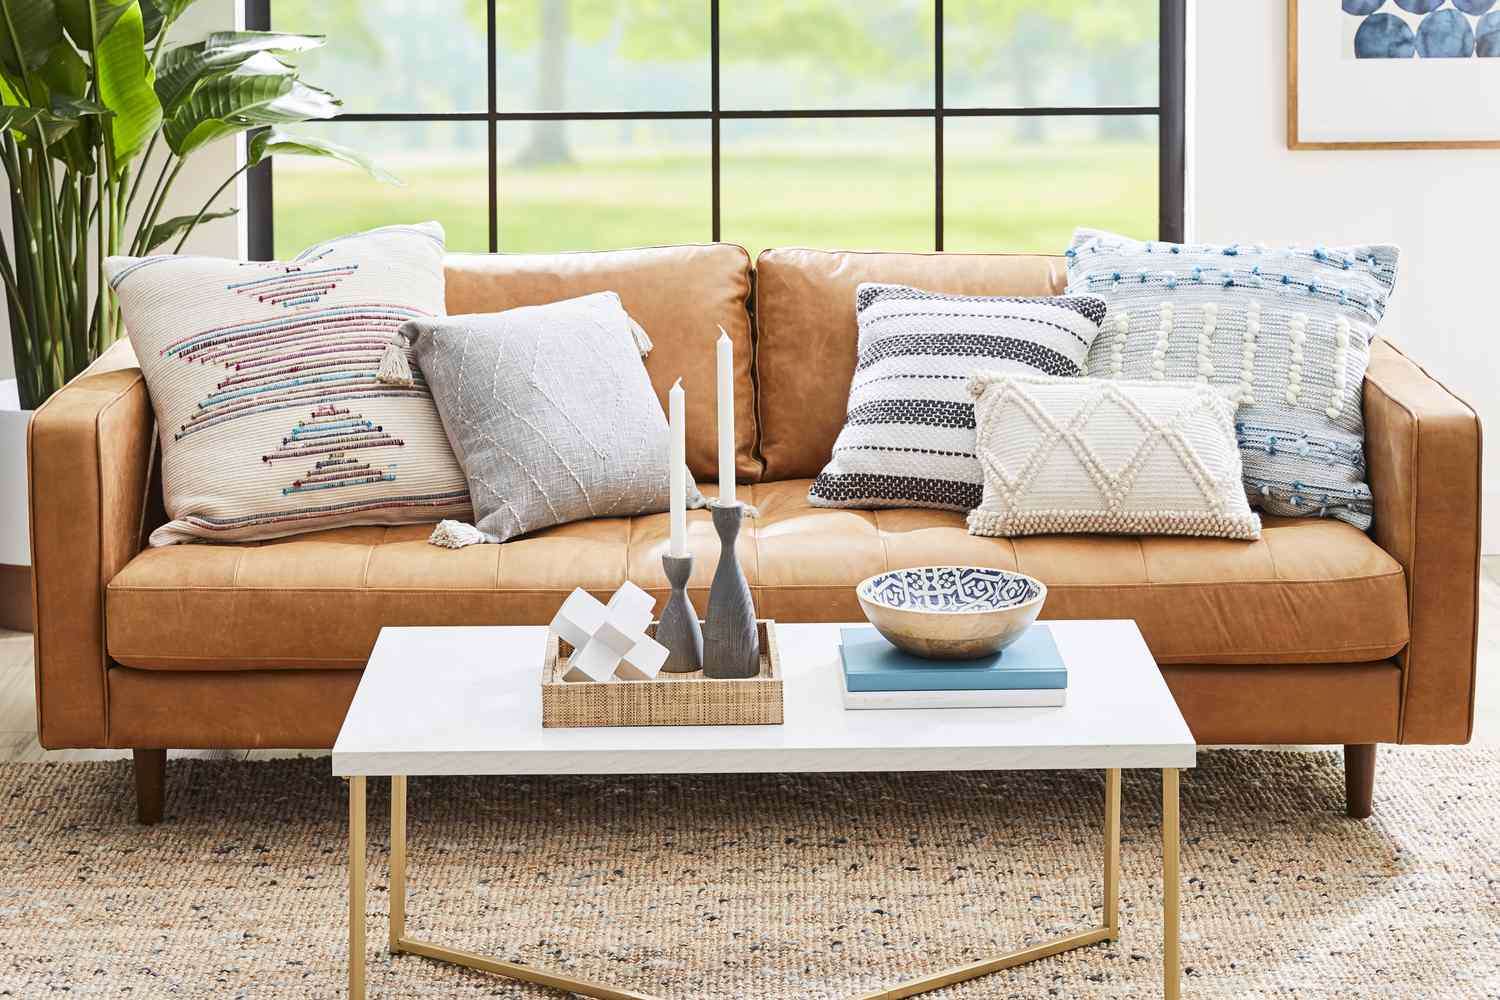 How To Select Pillows For Sofa